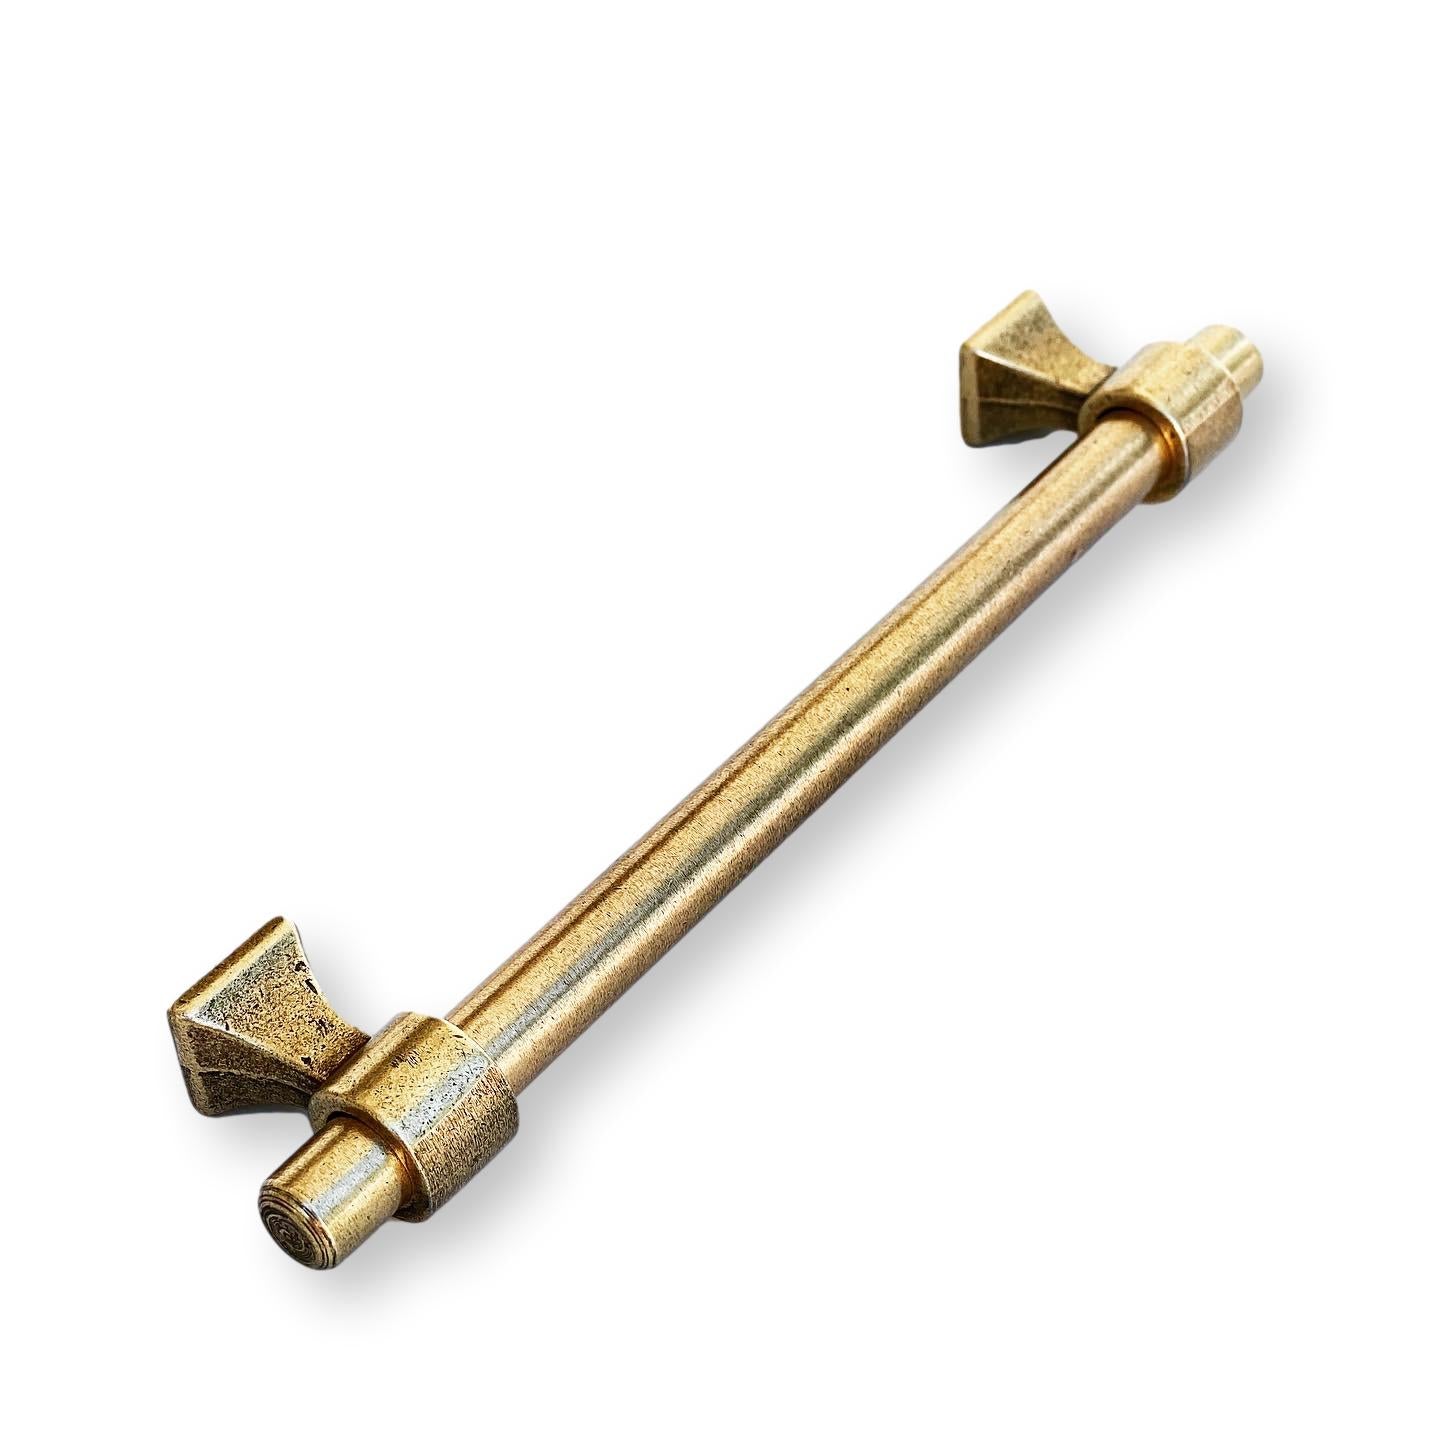 Brass Solid Texture No.2 Knurled Drawer Pulls and Knobs in Satin Bra –  Forge Hardware Studio